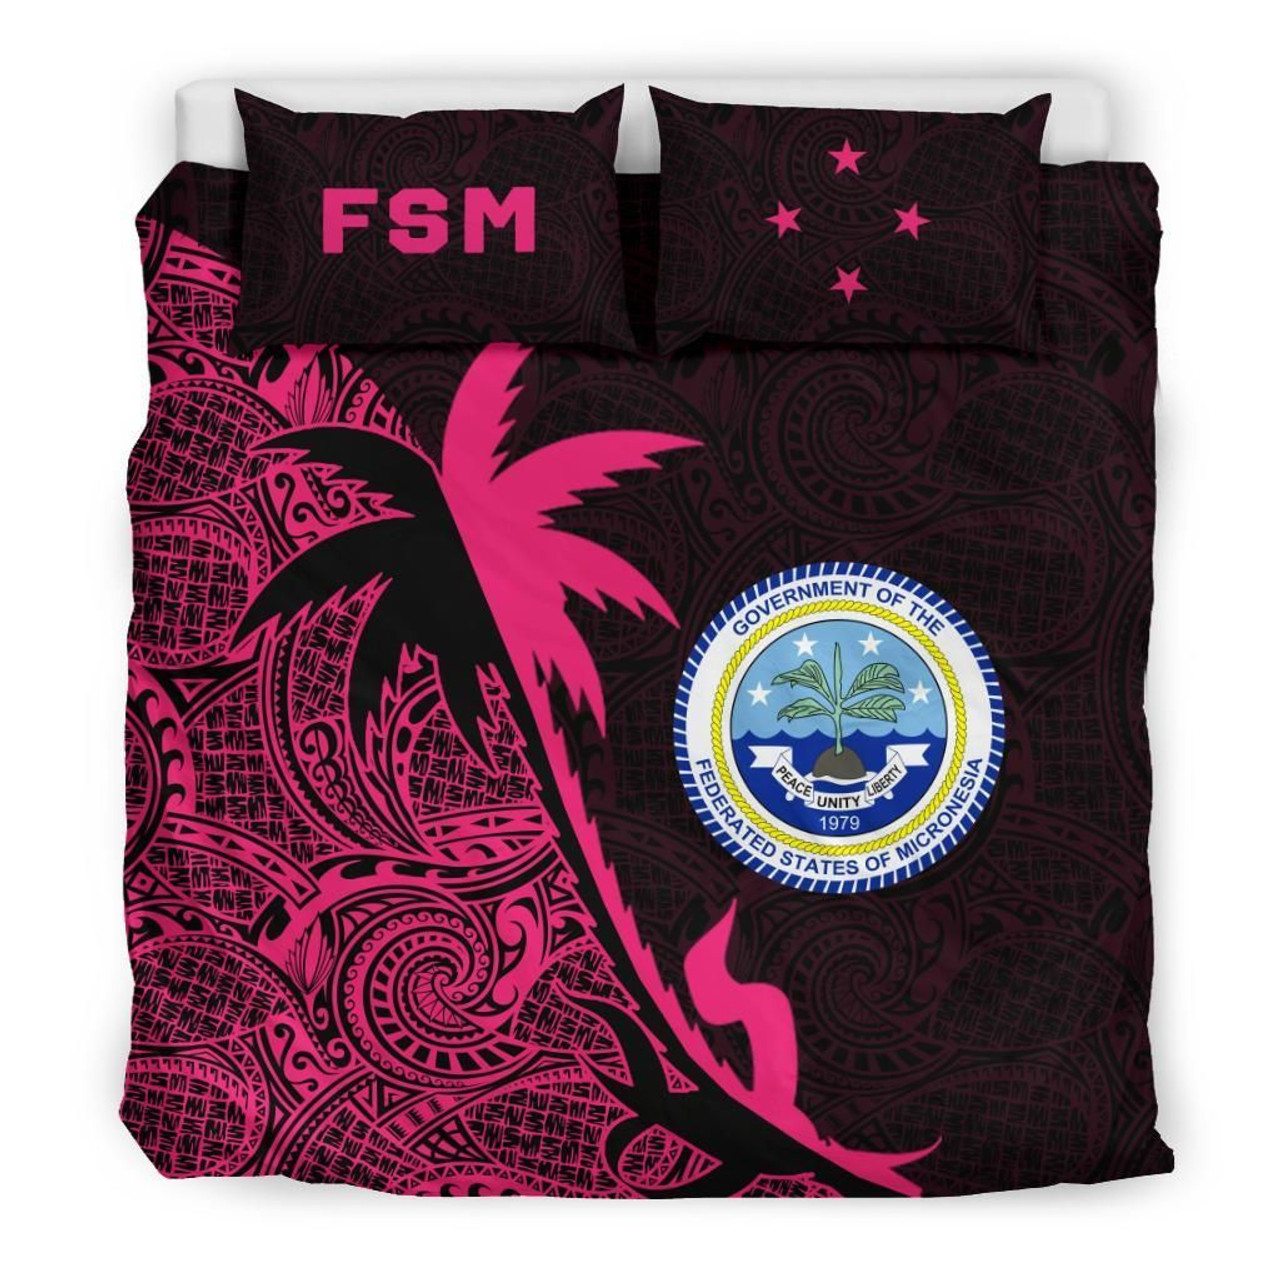 Federated States Of Micronesia Duvet Cover Set - Federated States Of Micronesia Coat Of Arms & Coconut Tree Pink 1